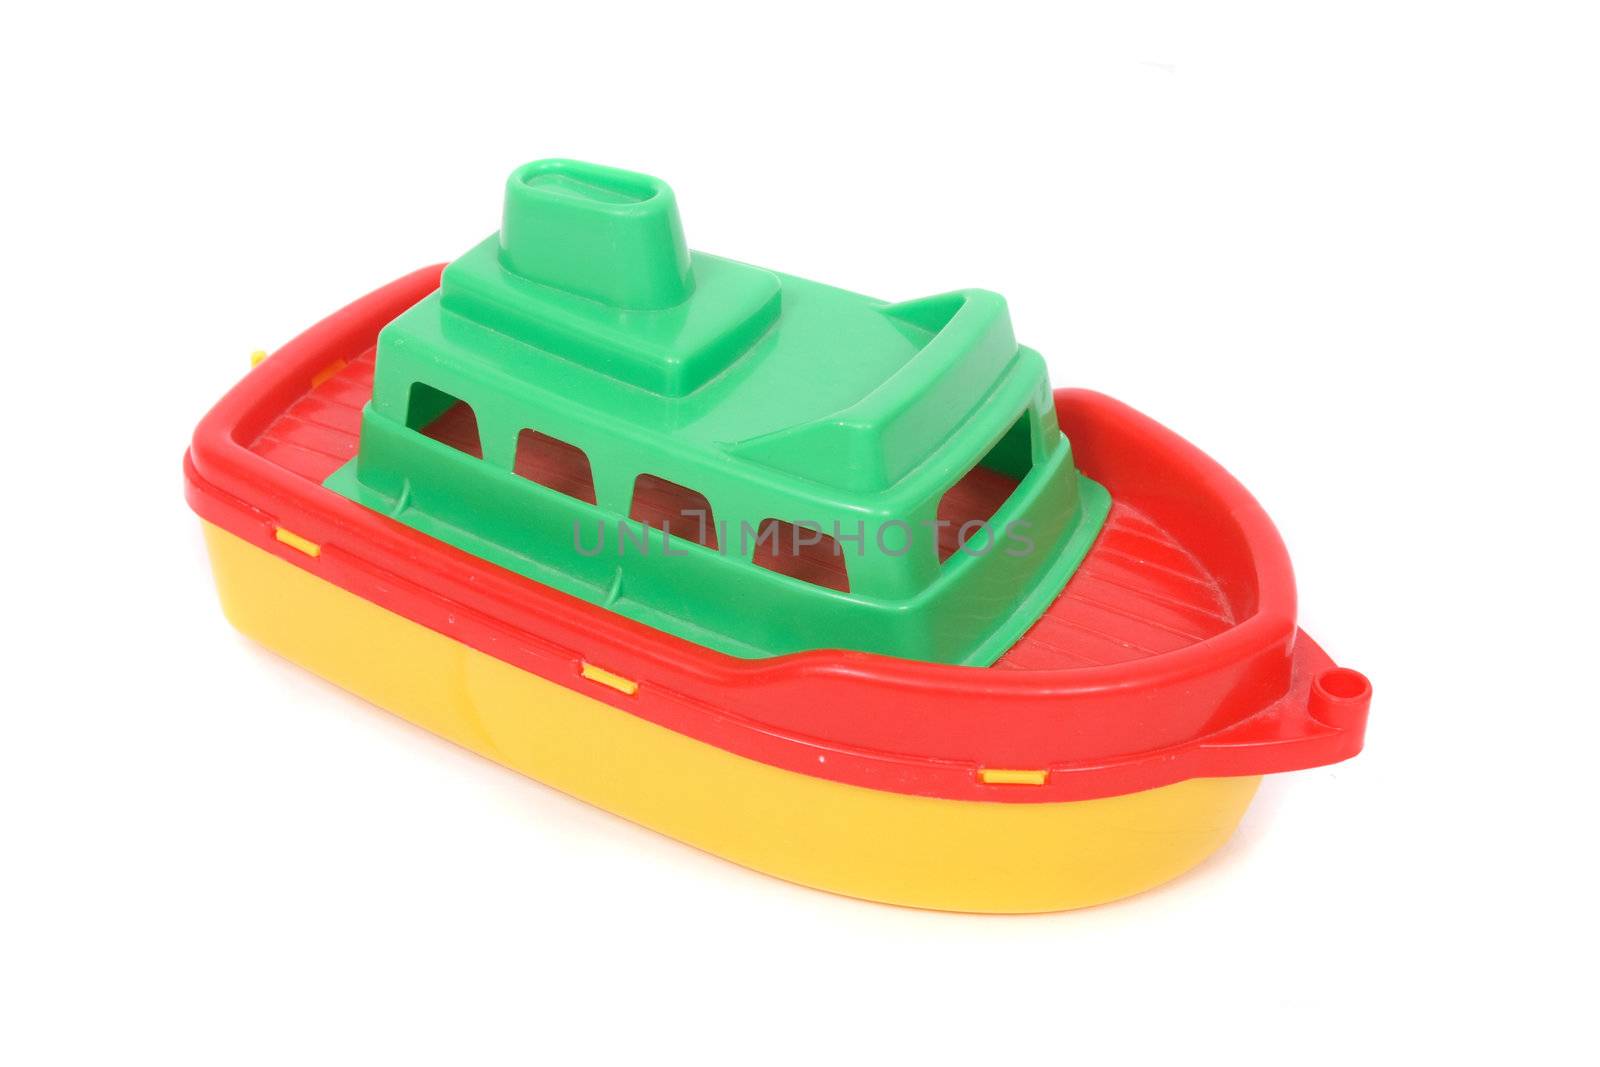 plastic toy boat on the white background